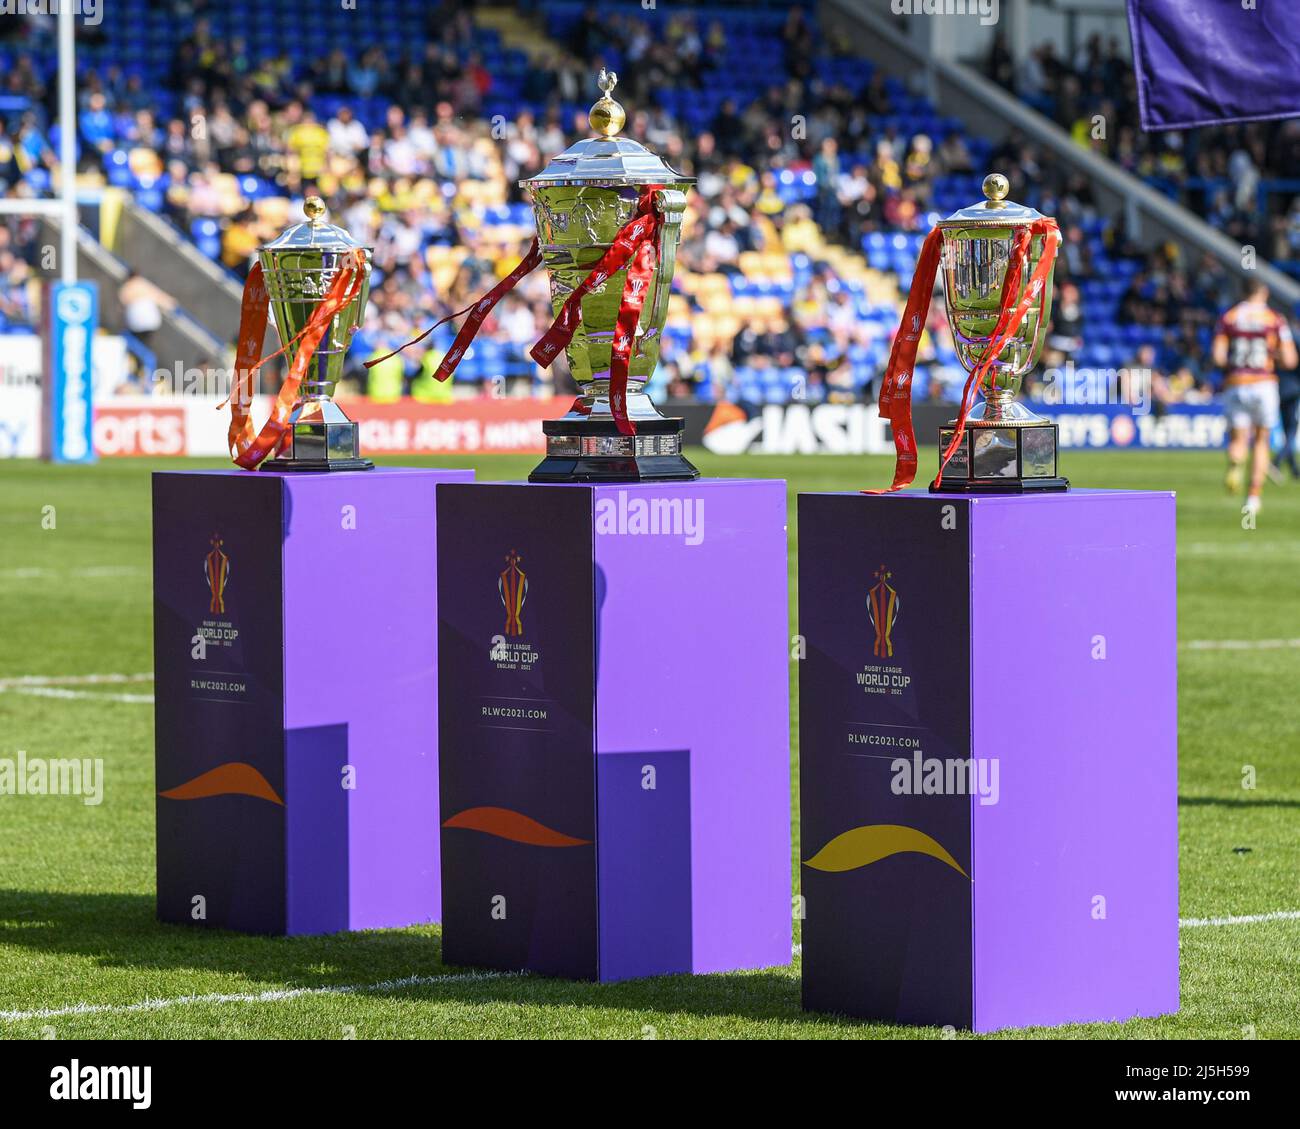 Warrington, UK. 23rd Apr, 2022. The Rugby League World Cup trophies on display at The Halliwell Jones Stadium in Warrington, United Kingdom on 4/23/2022. (Photo by Simon Whitehead/News Images/Sipa USA) Credit: Sipa USA/Alamy Live News Stock Photo